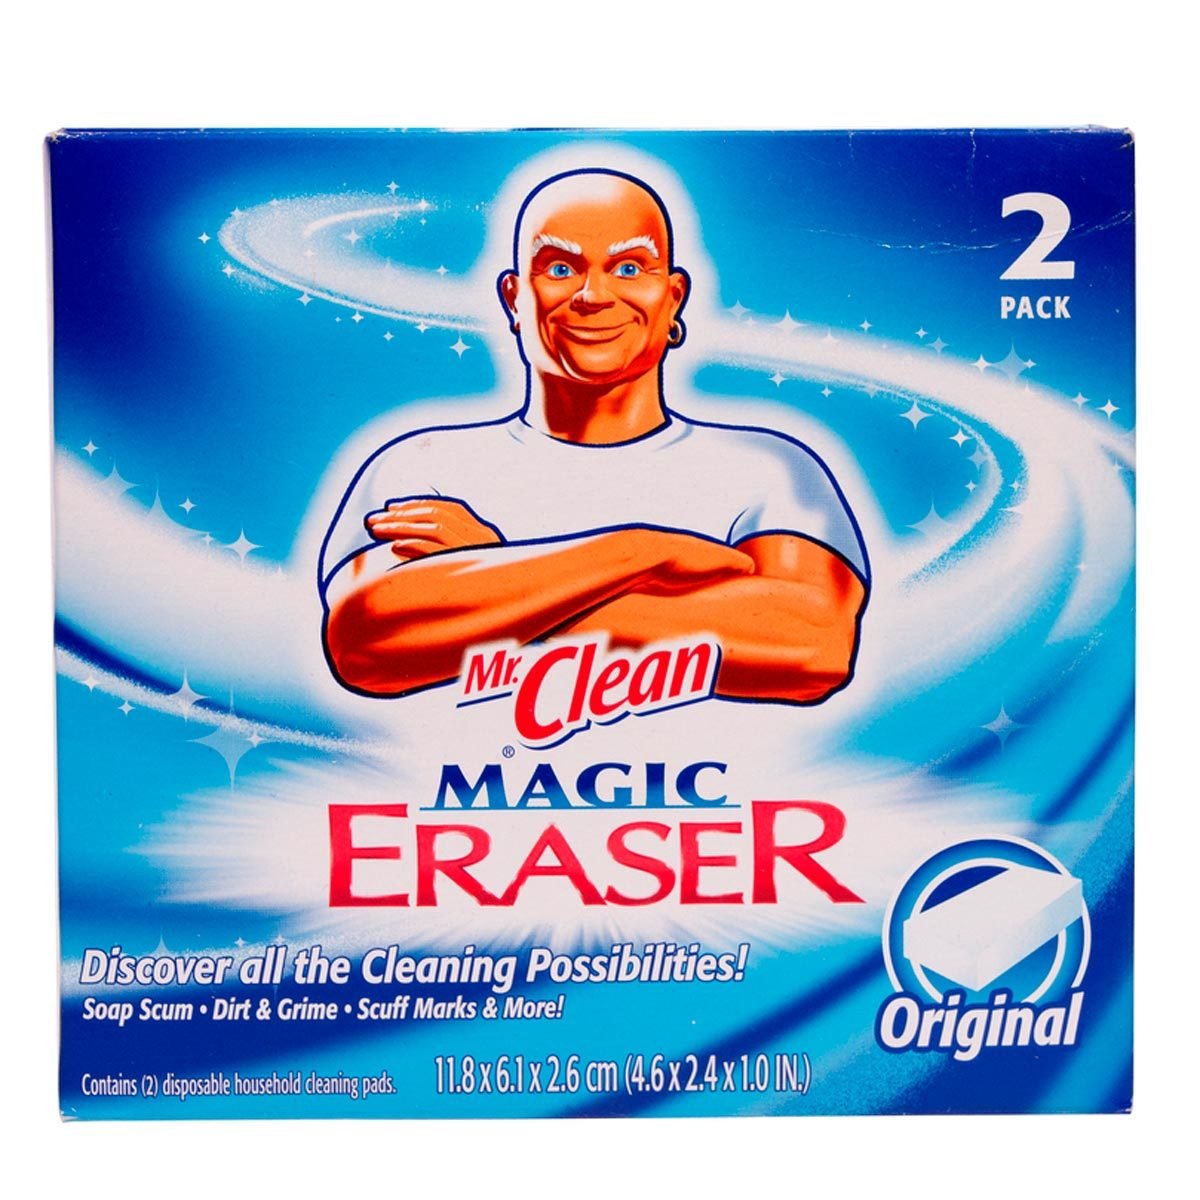 10 Things You Should Never Do With A Magic Eraser